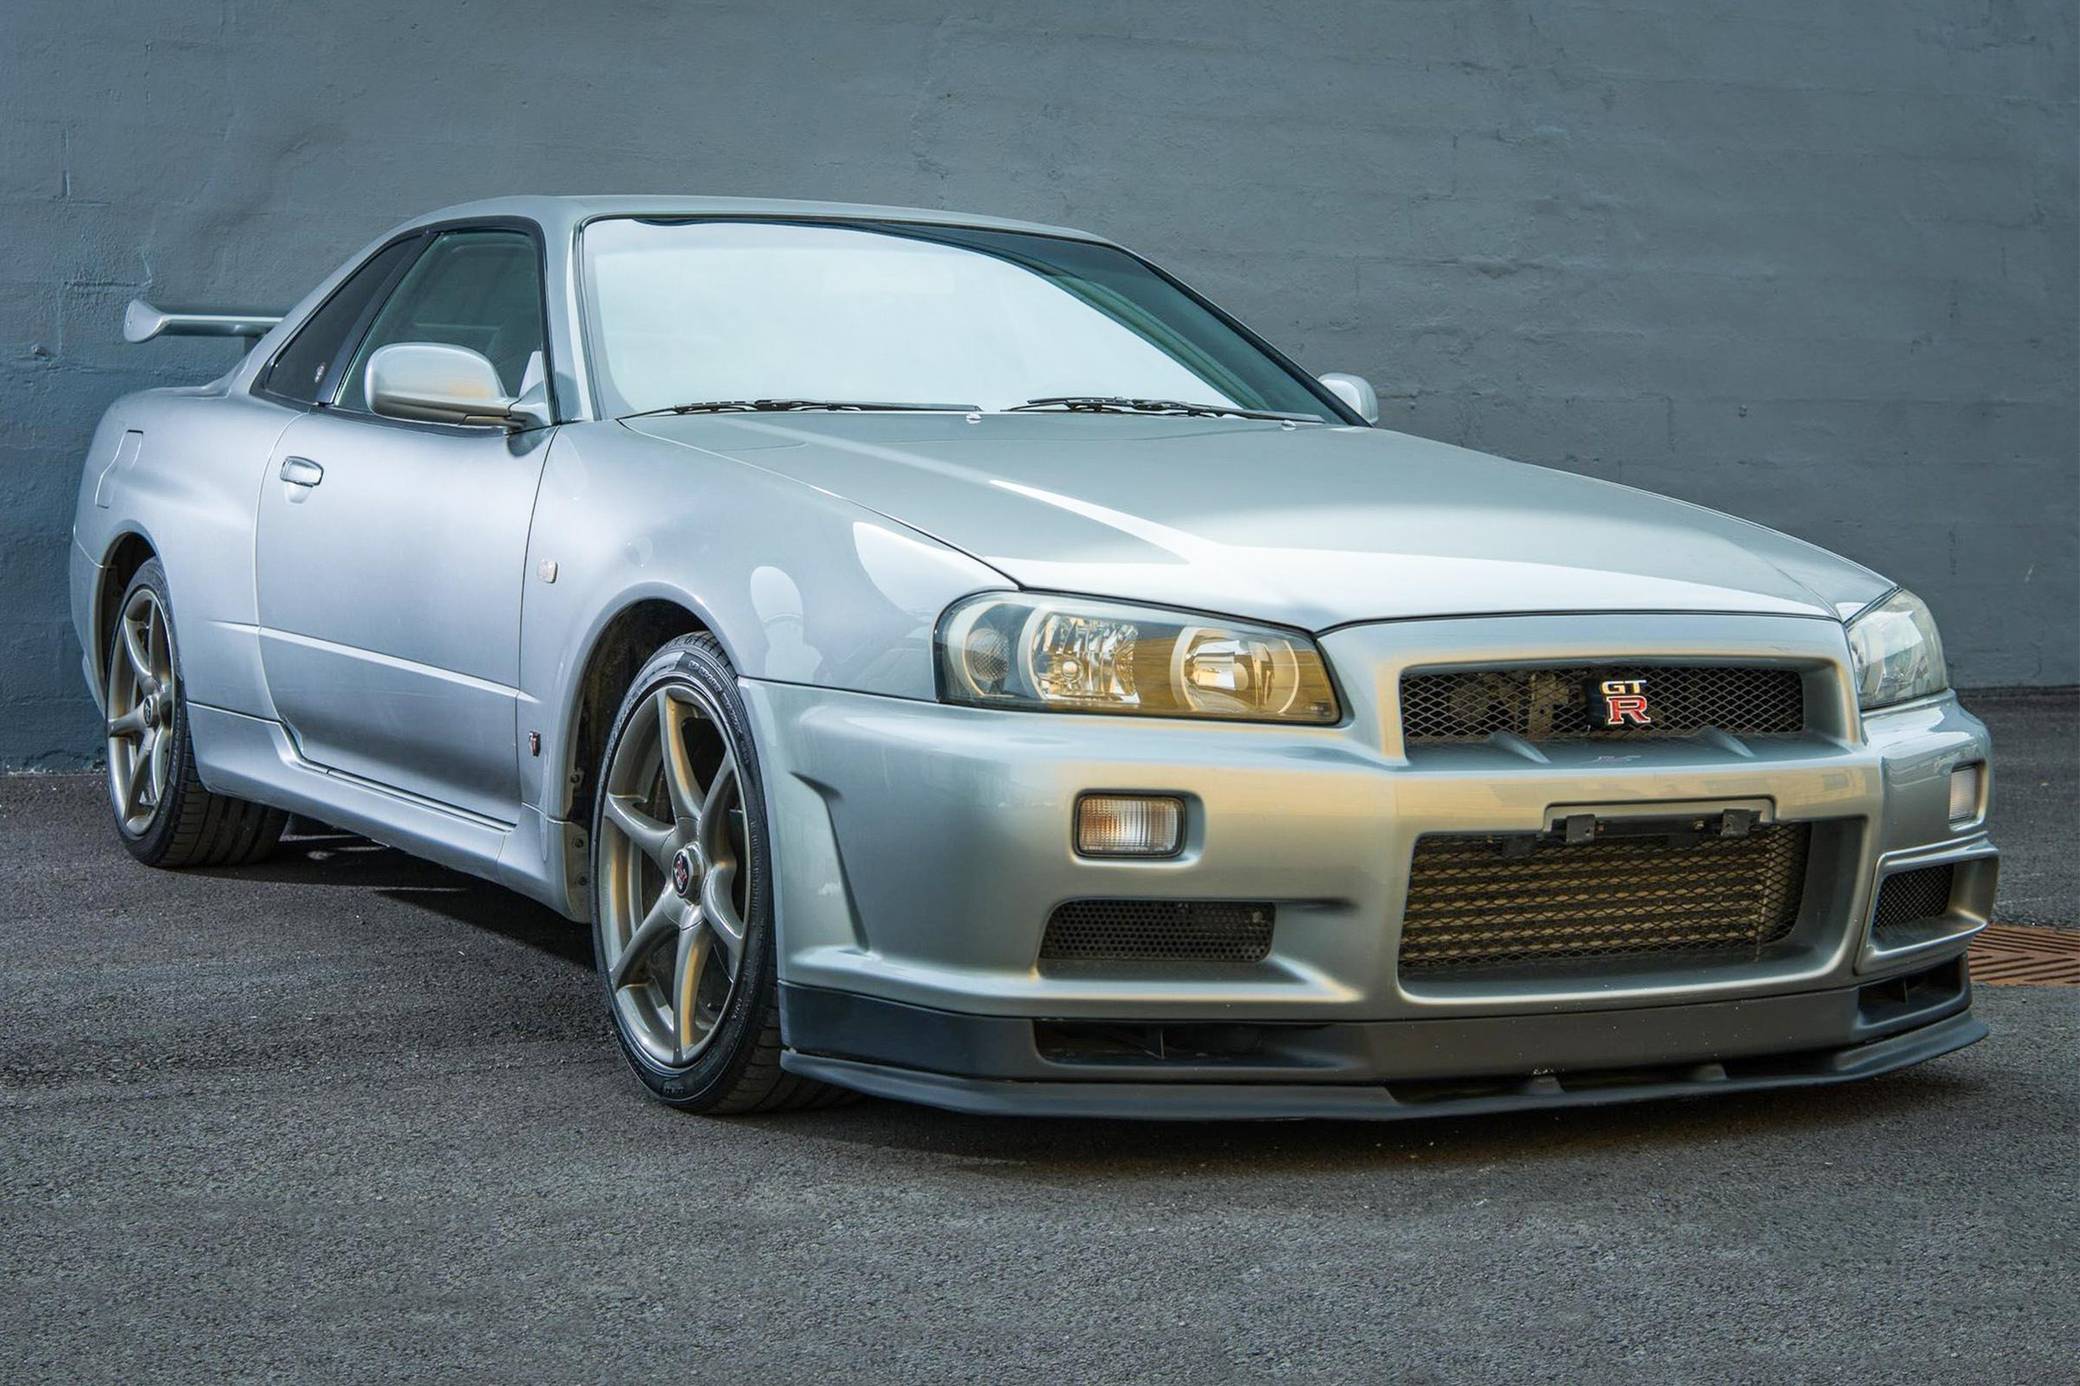 Is THIS the New Nissan Skyline GT-R? 